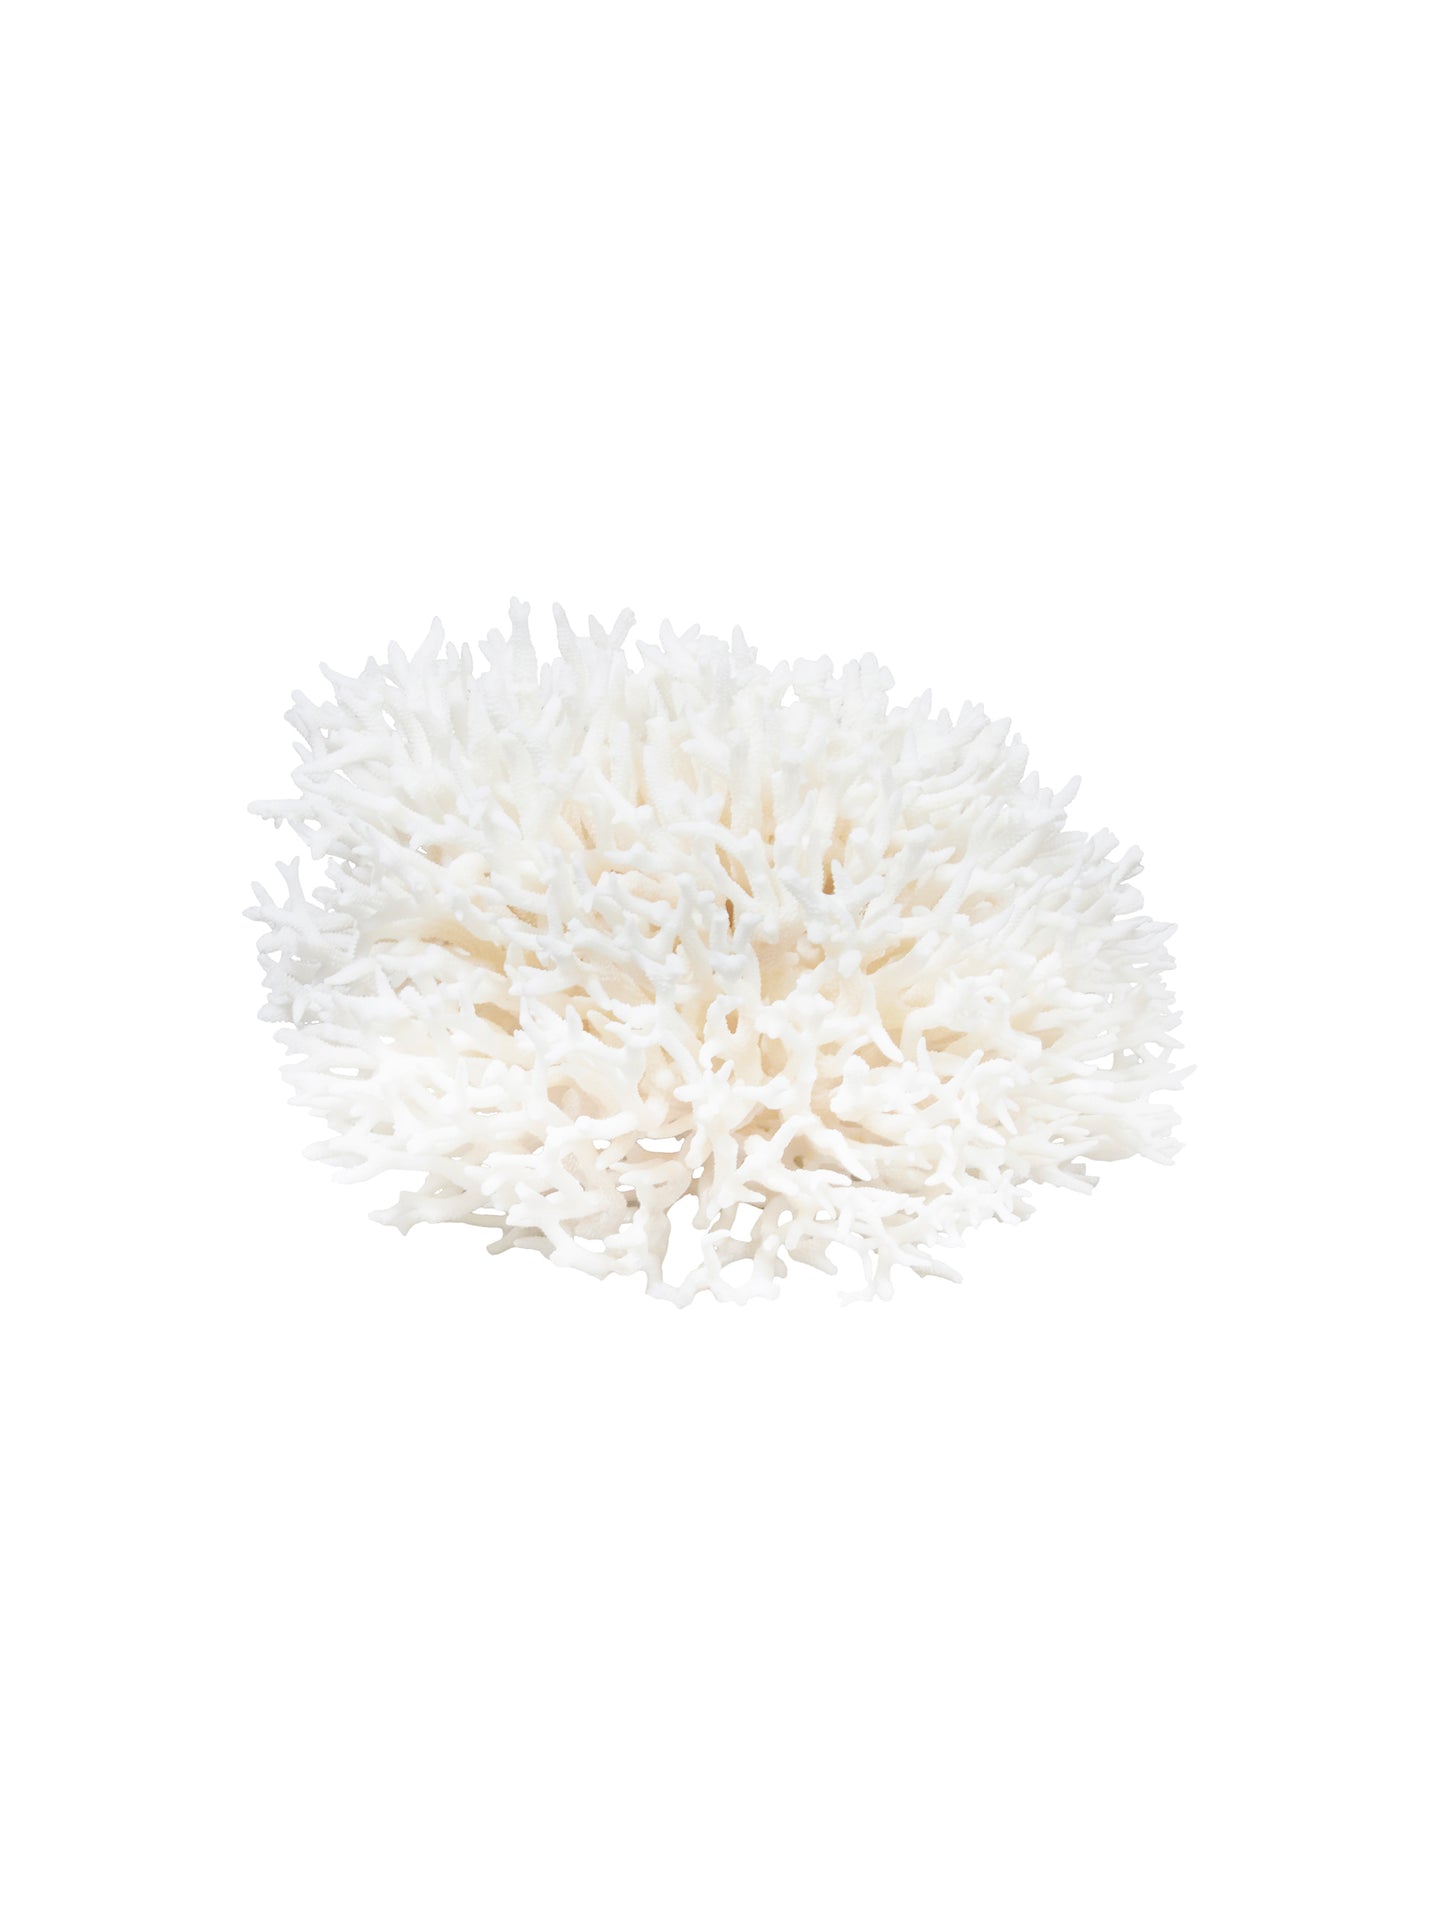 South Pacific Bird's Nest Coral Style Three Weston Table